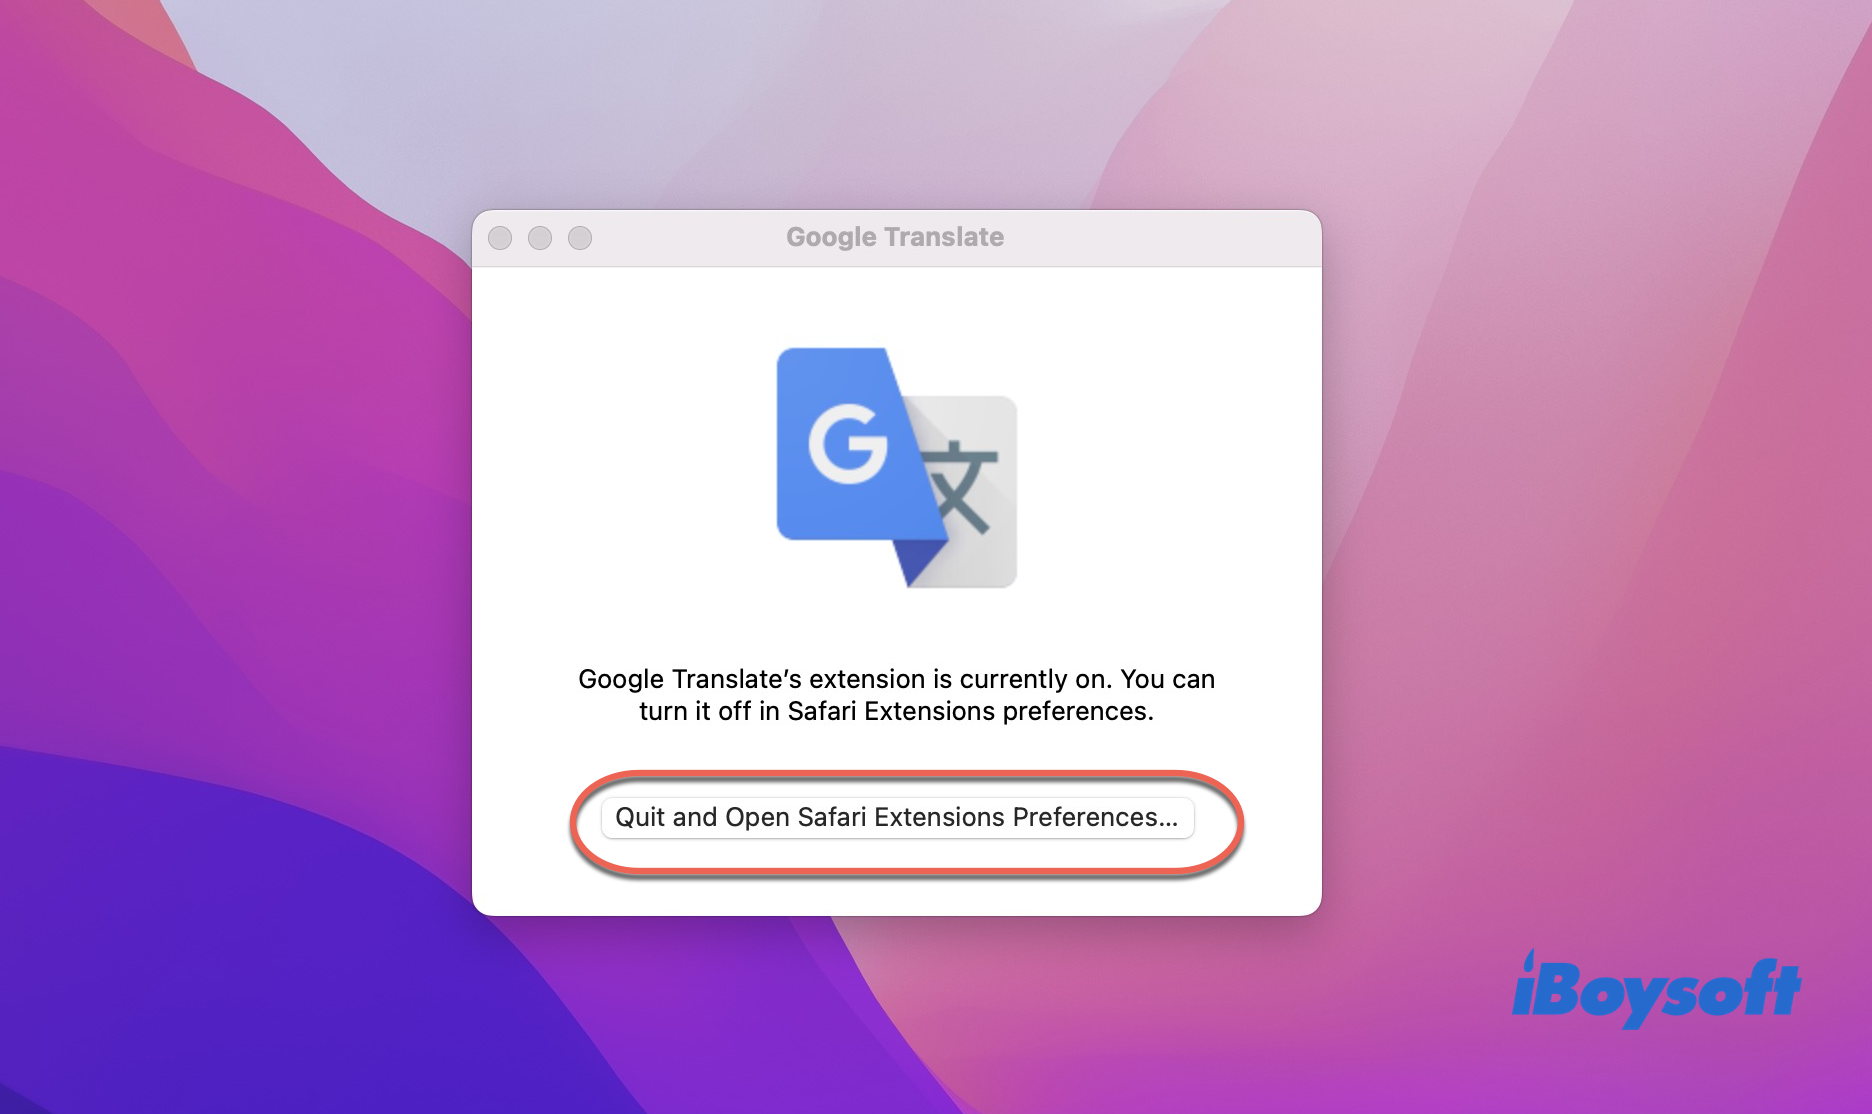 Quit and Open Safari Extensions Preferences